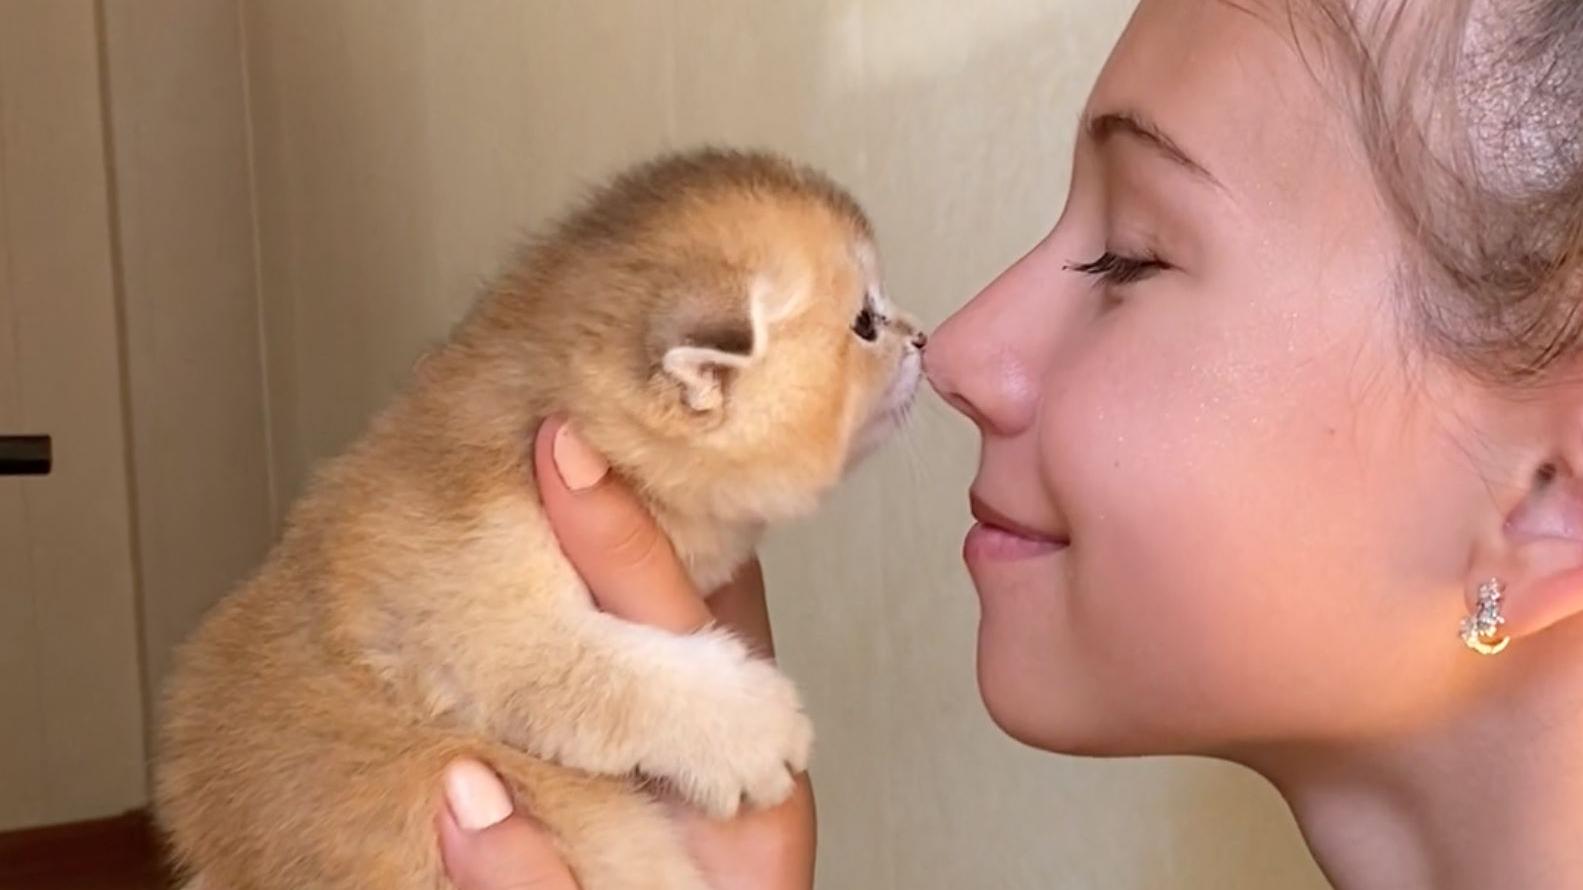 A woman and a small orange kitten rub noses affectionately.